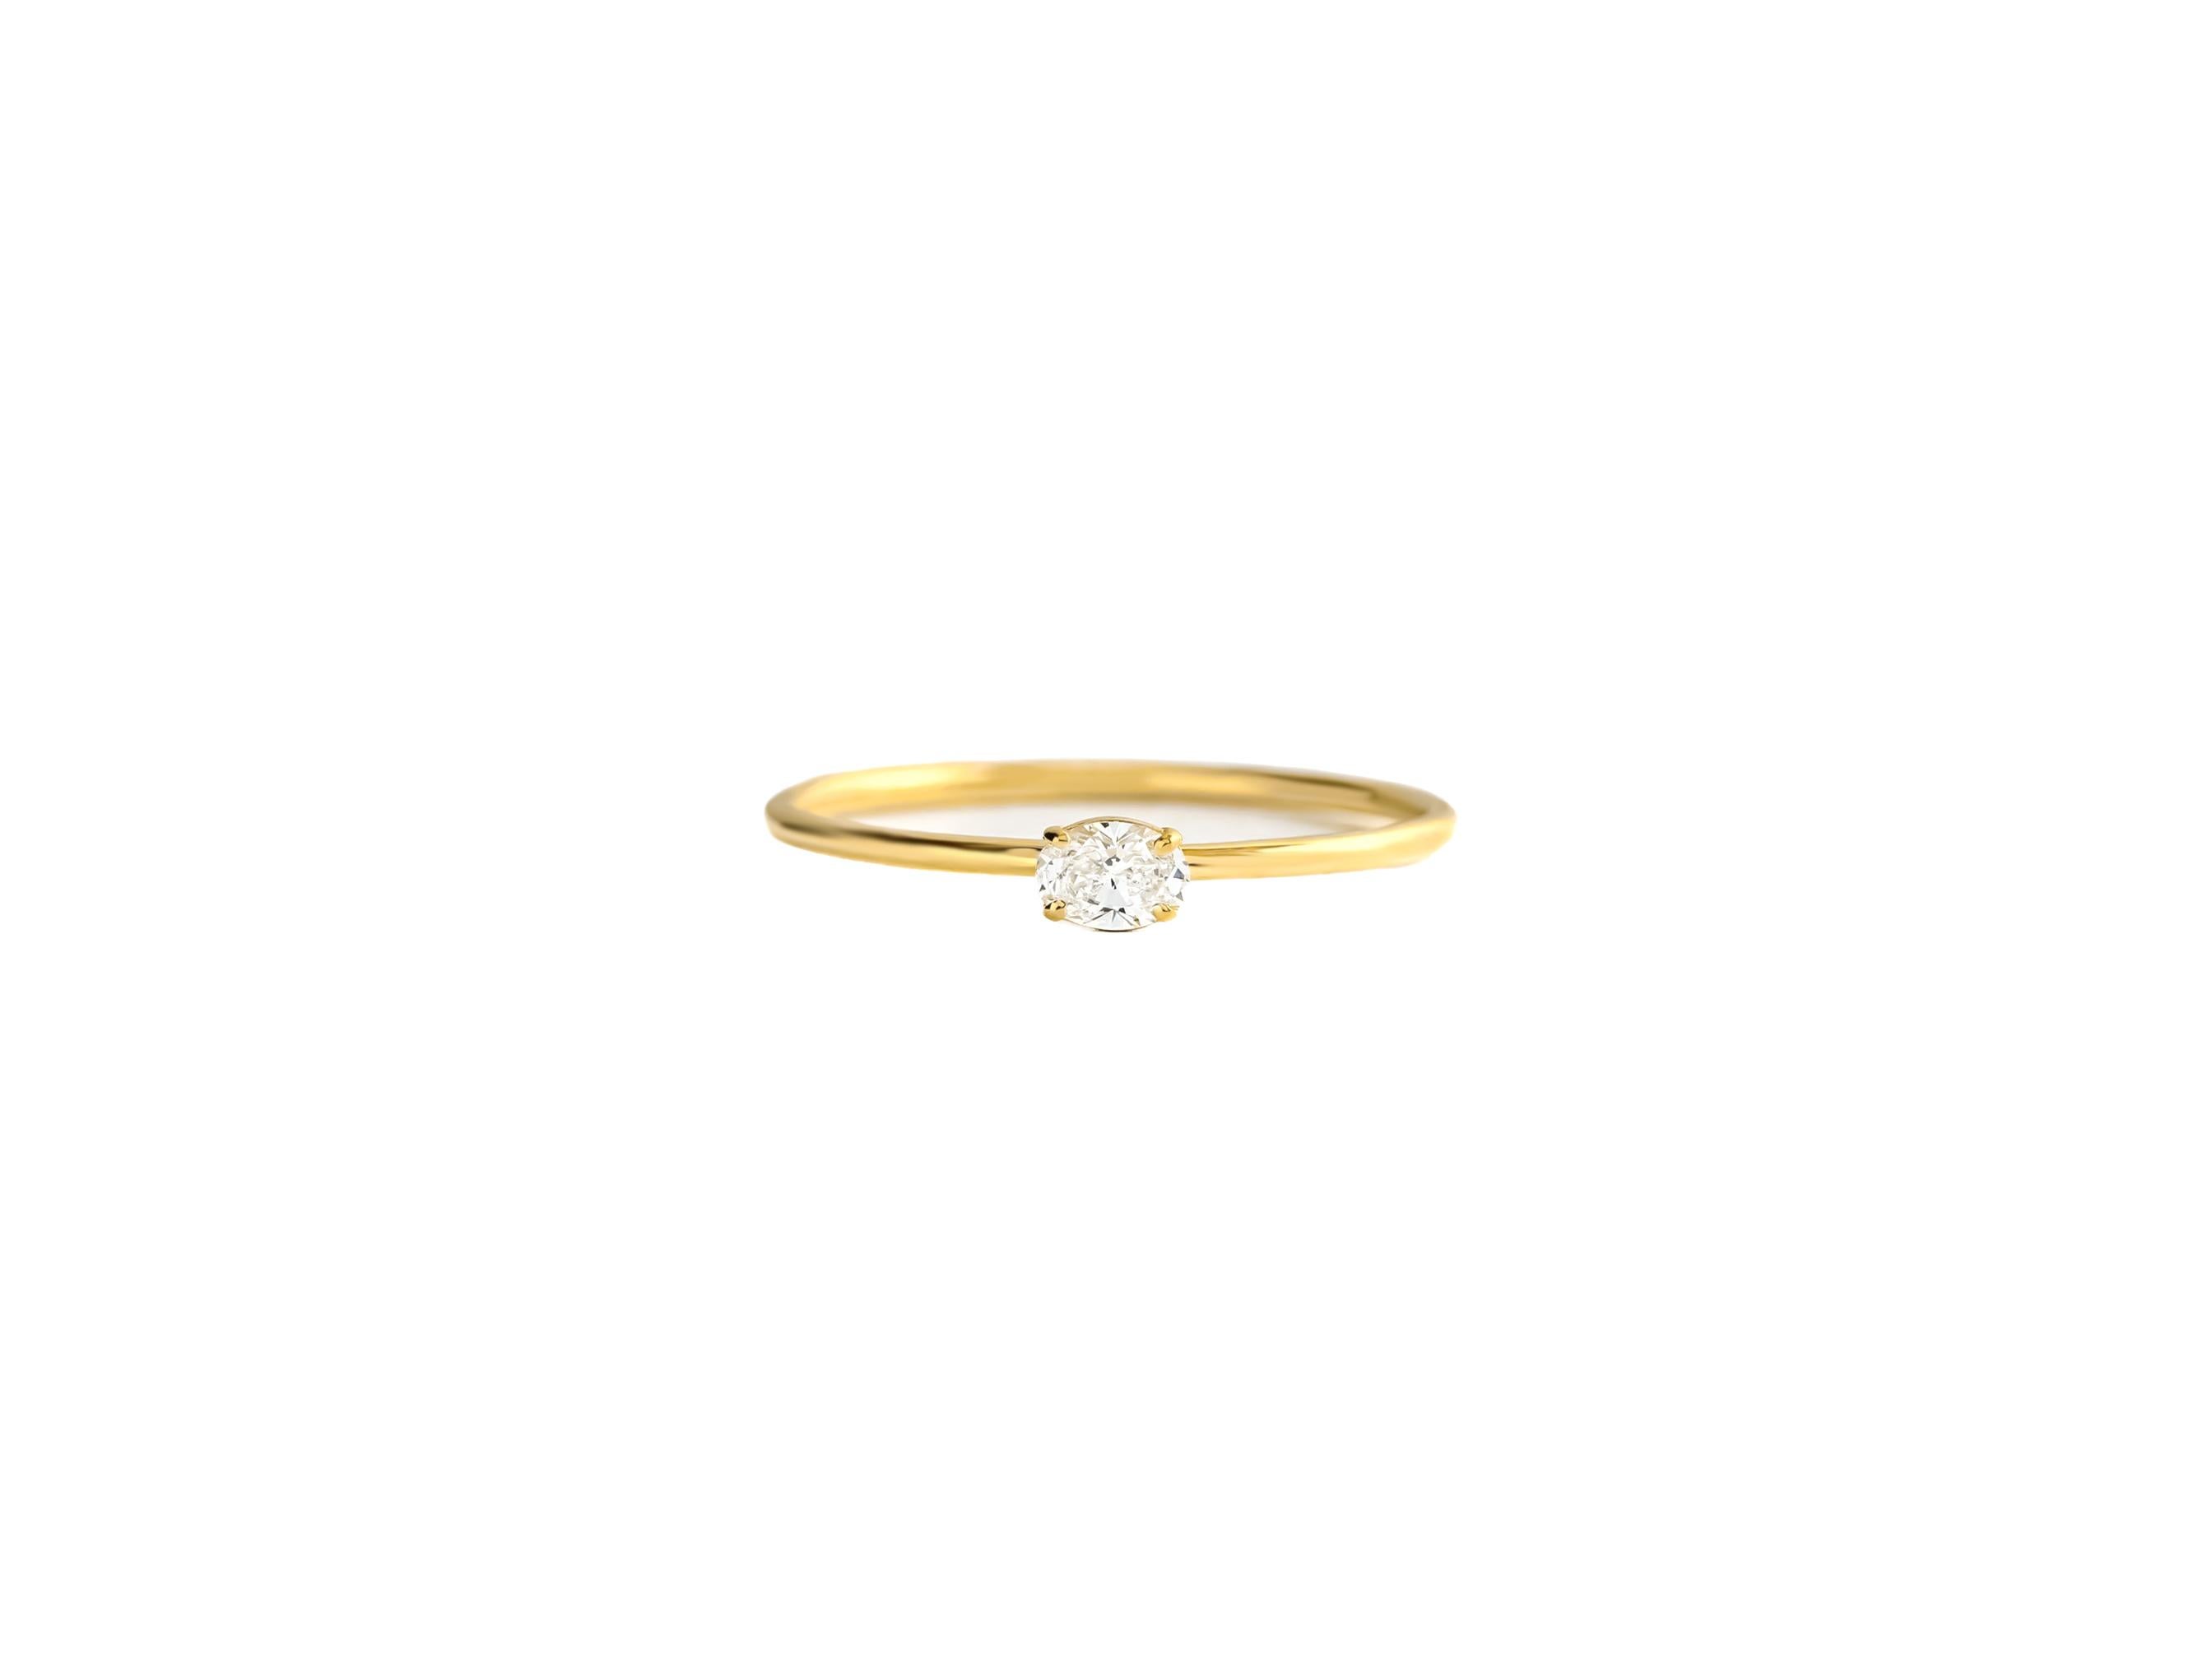 Tiny 14k gold ring with oval moissanite. Oval moissanite gold ring. Everyday ring with moissanite. Moissanite engangement ring. Delicate moissanite ring.

Metal: 14k gold
Weight: 1.5gr depends from size

Gemstones:
 Oval cut moissanite. 0.5 ct, D